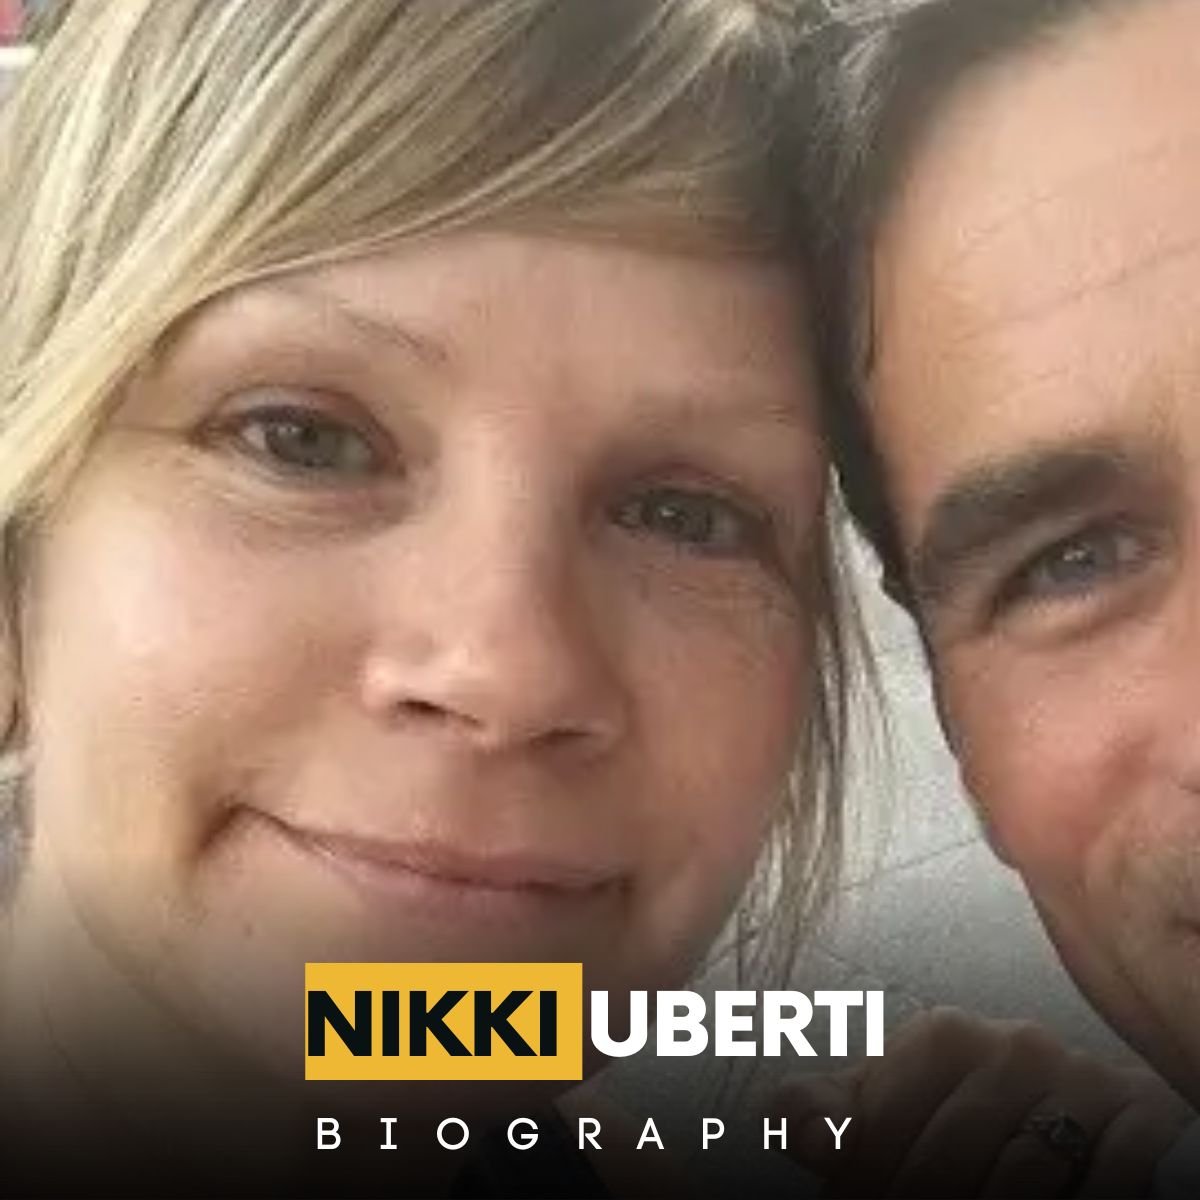 Who is Eddie Cahill’s Wife, Nikki Uberti? Uncovering The Untold Facts About Her Life